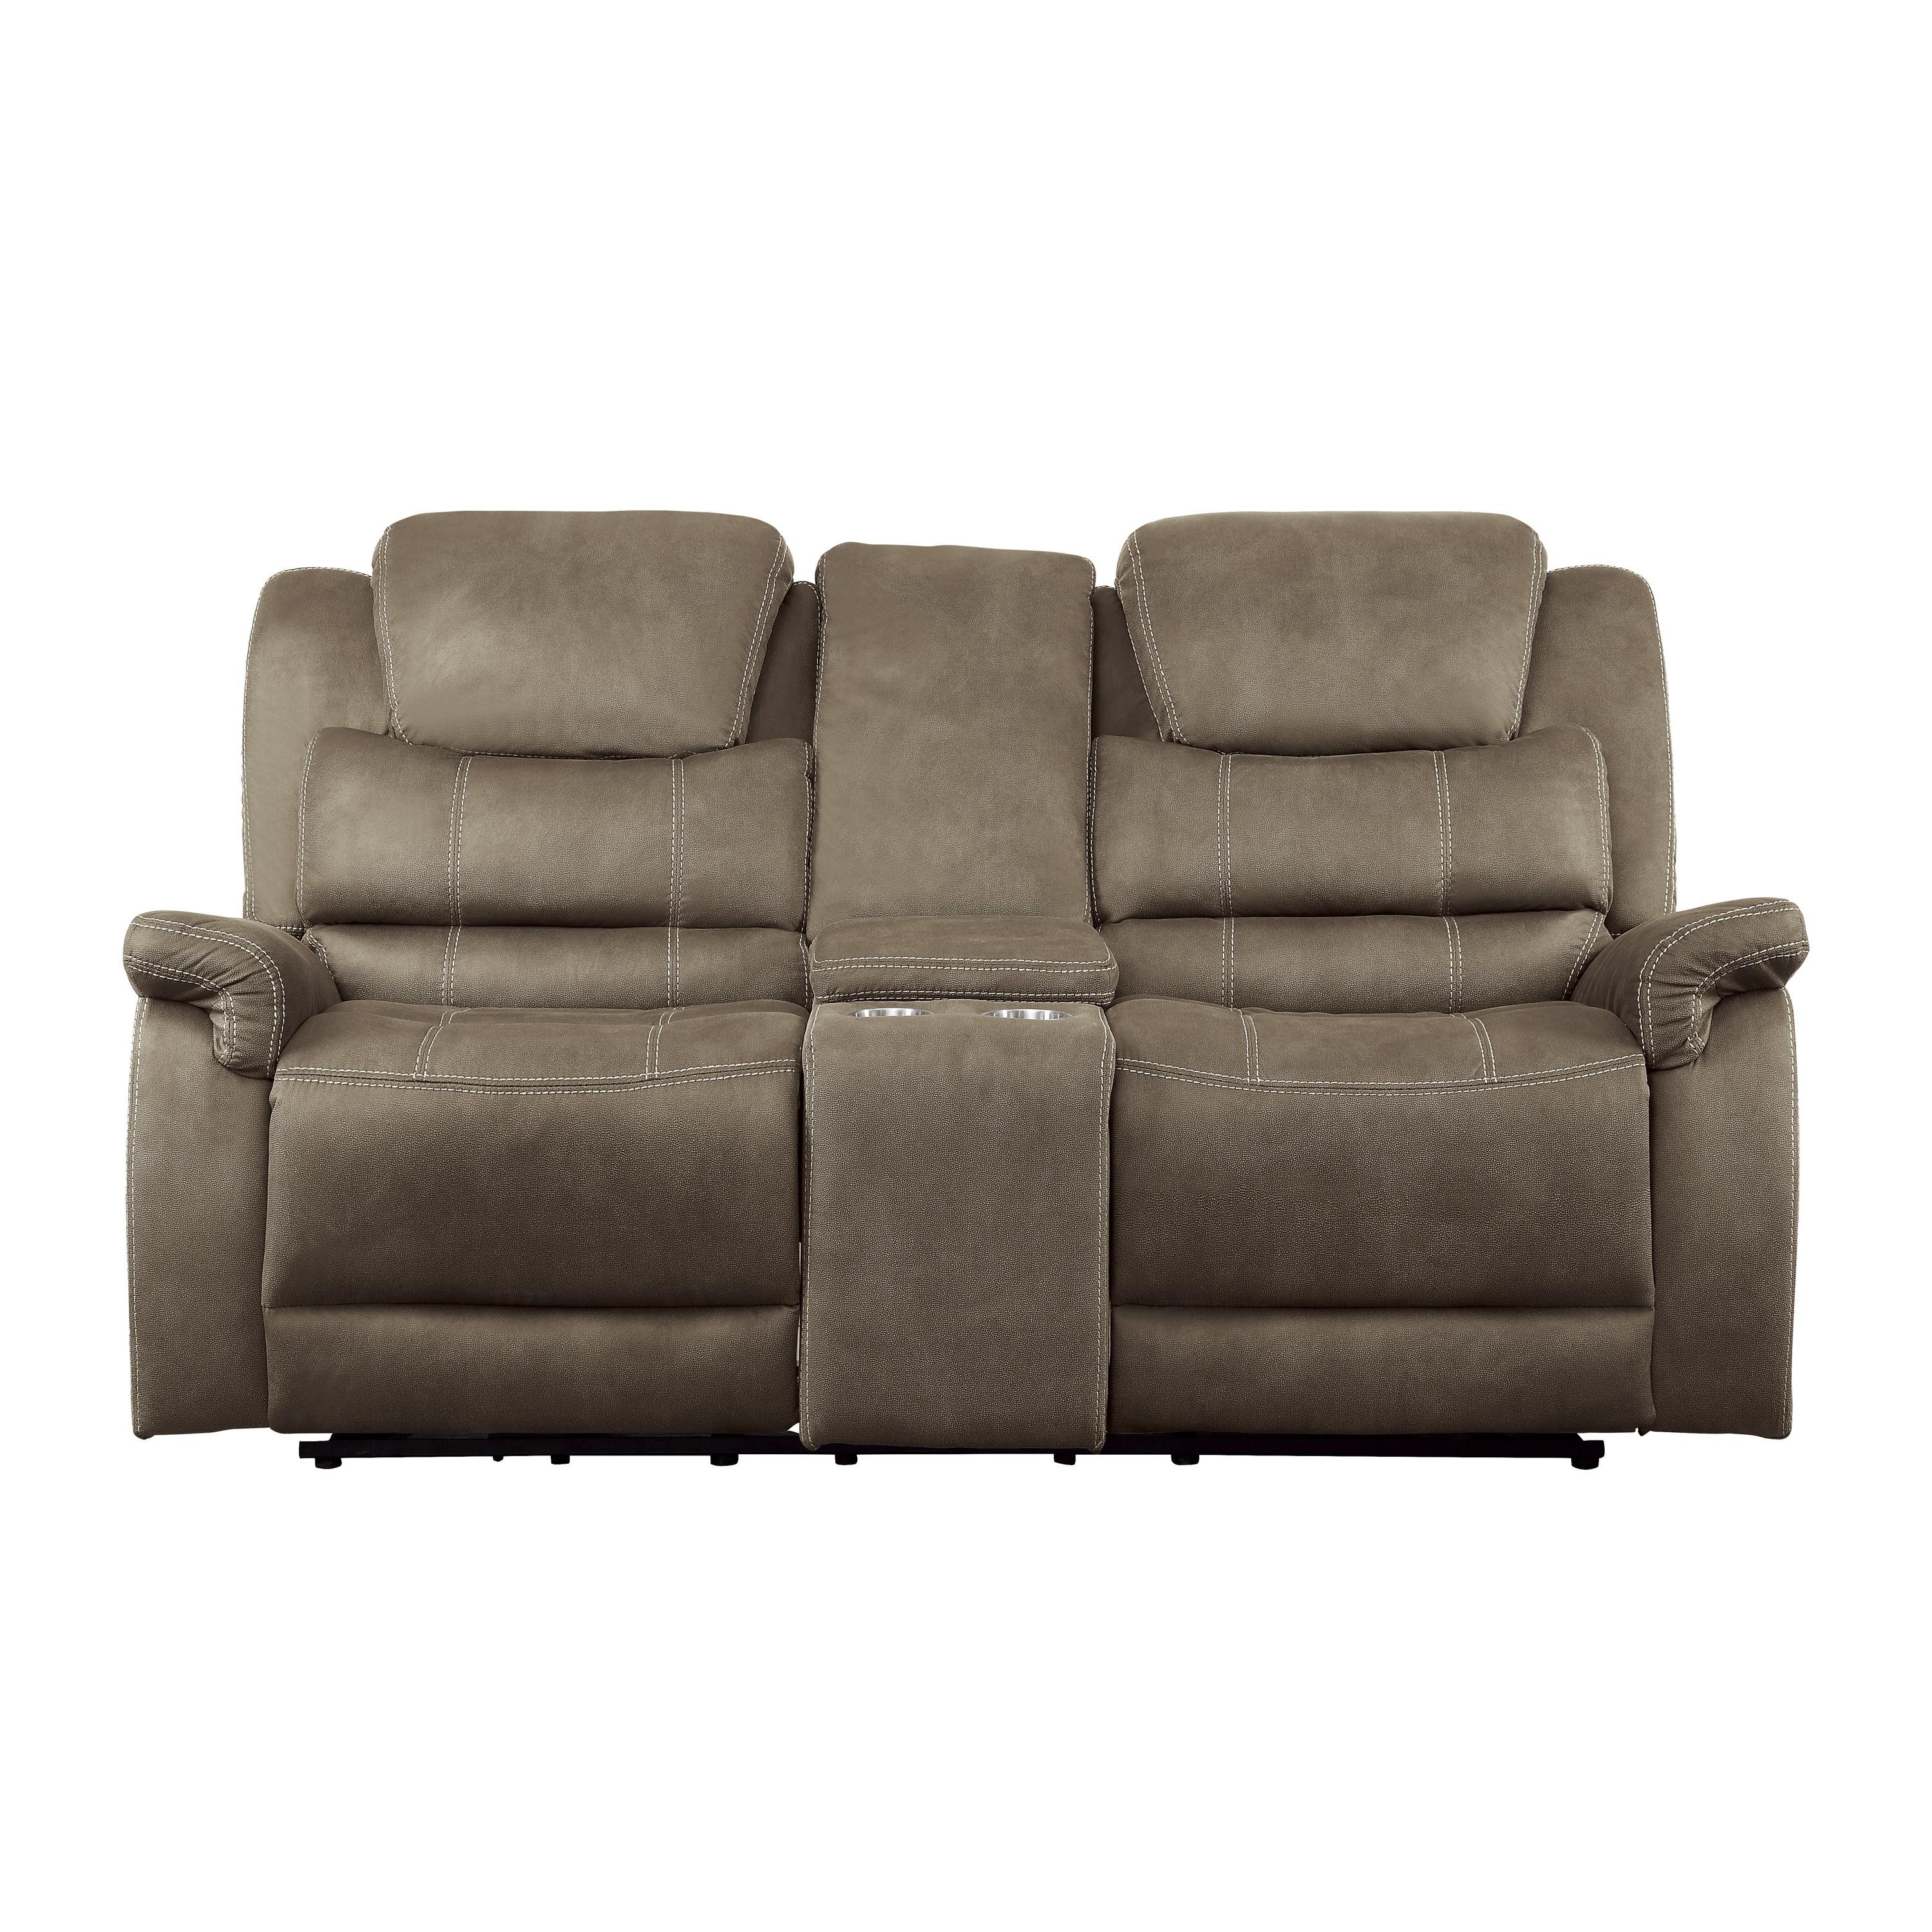 Transitional Power Reclining Loveseat 9848BR-2PWH Shola 9848BR-2PWH in Brown Microfiber